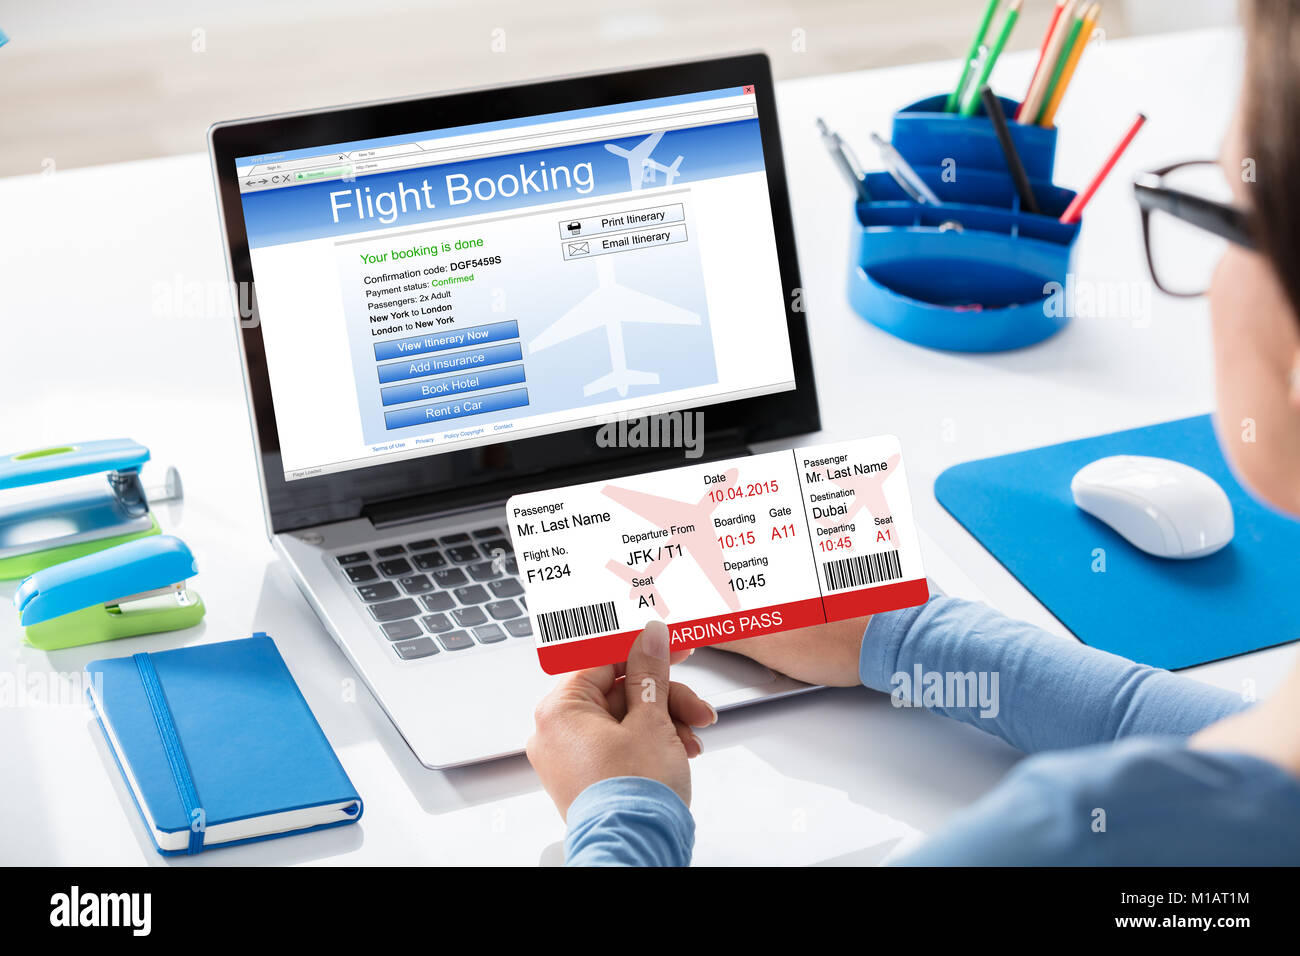 Close-up Of A Woman Holding Airline Ticket In Hand Booking Flight On Laptop Stock Photo